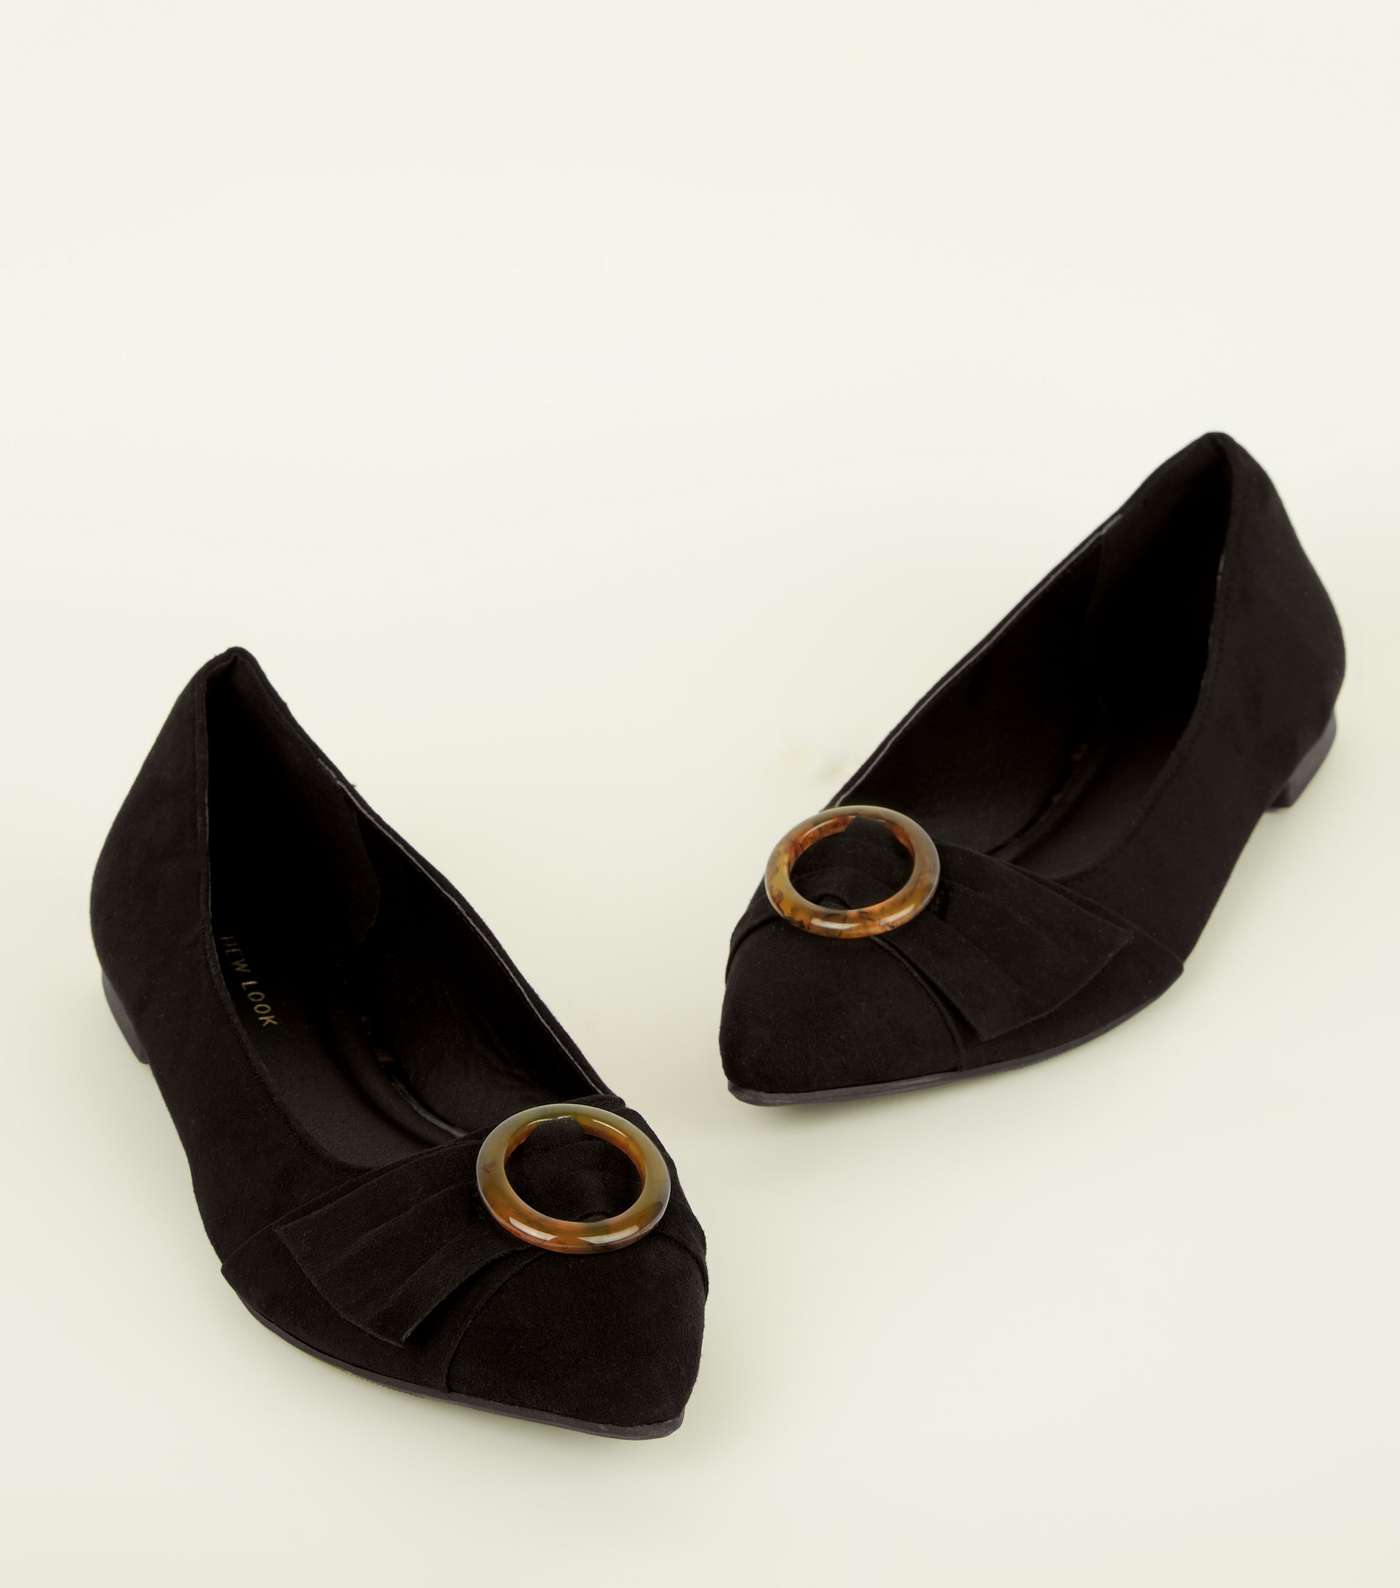 Black Resin Ring Strap Pointed Pumps Image 3